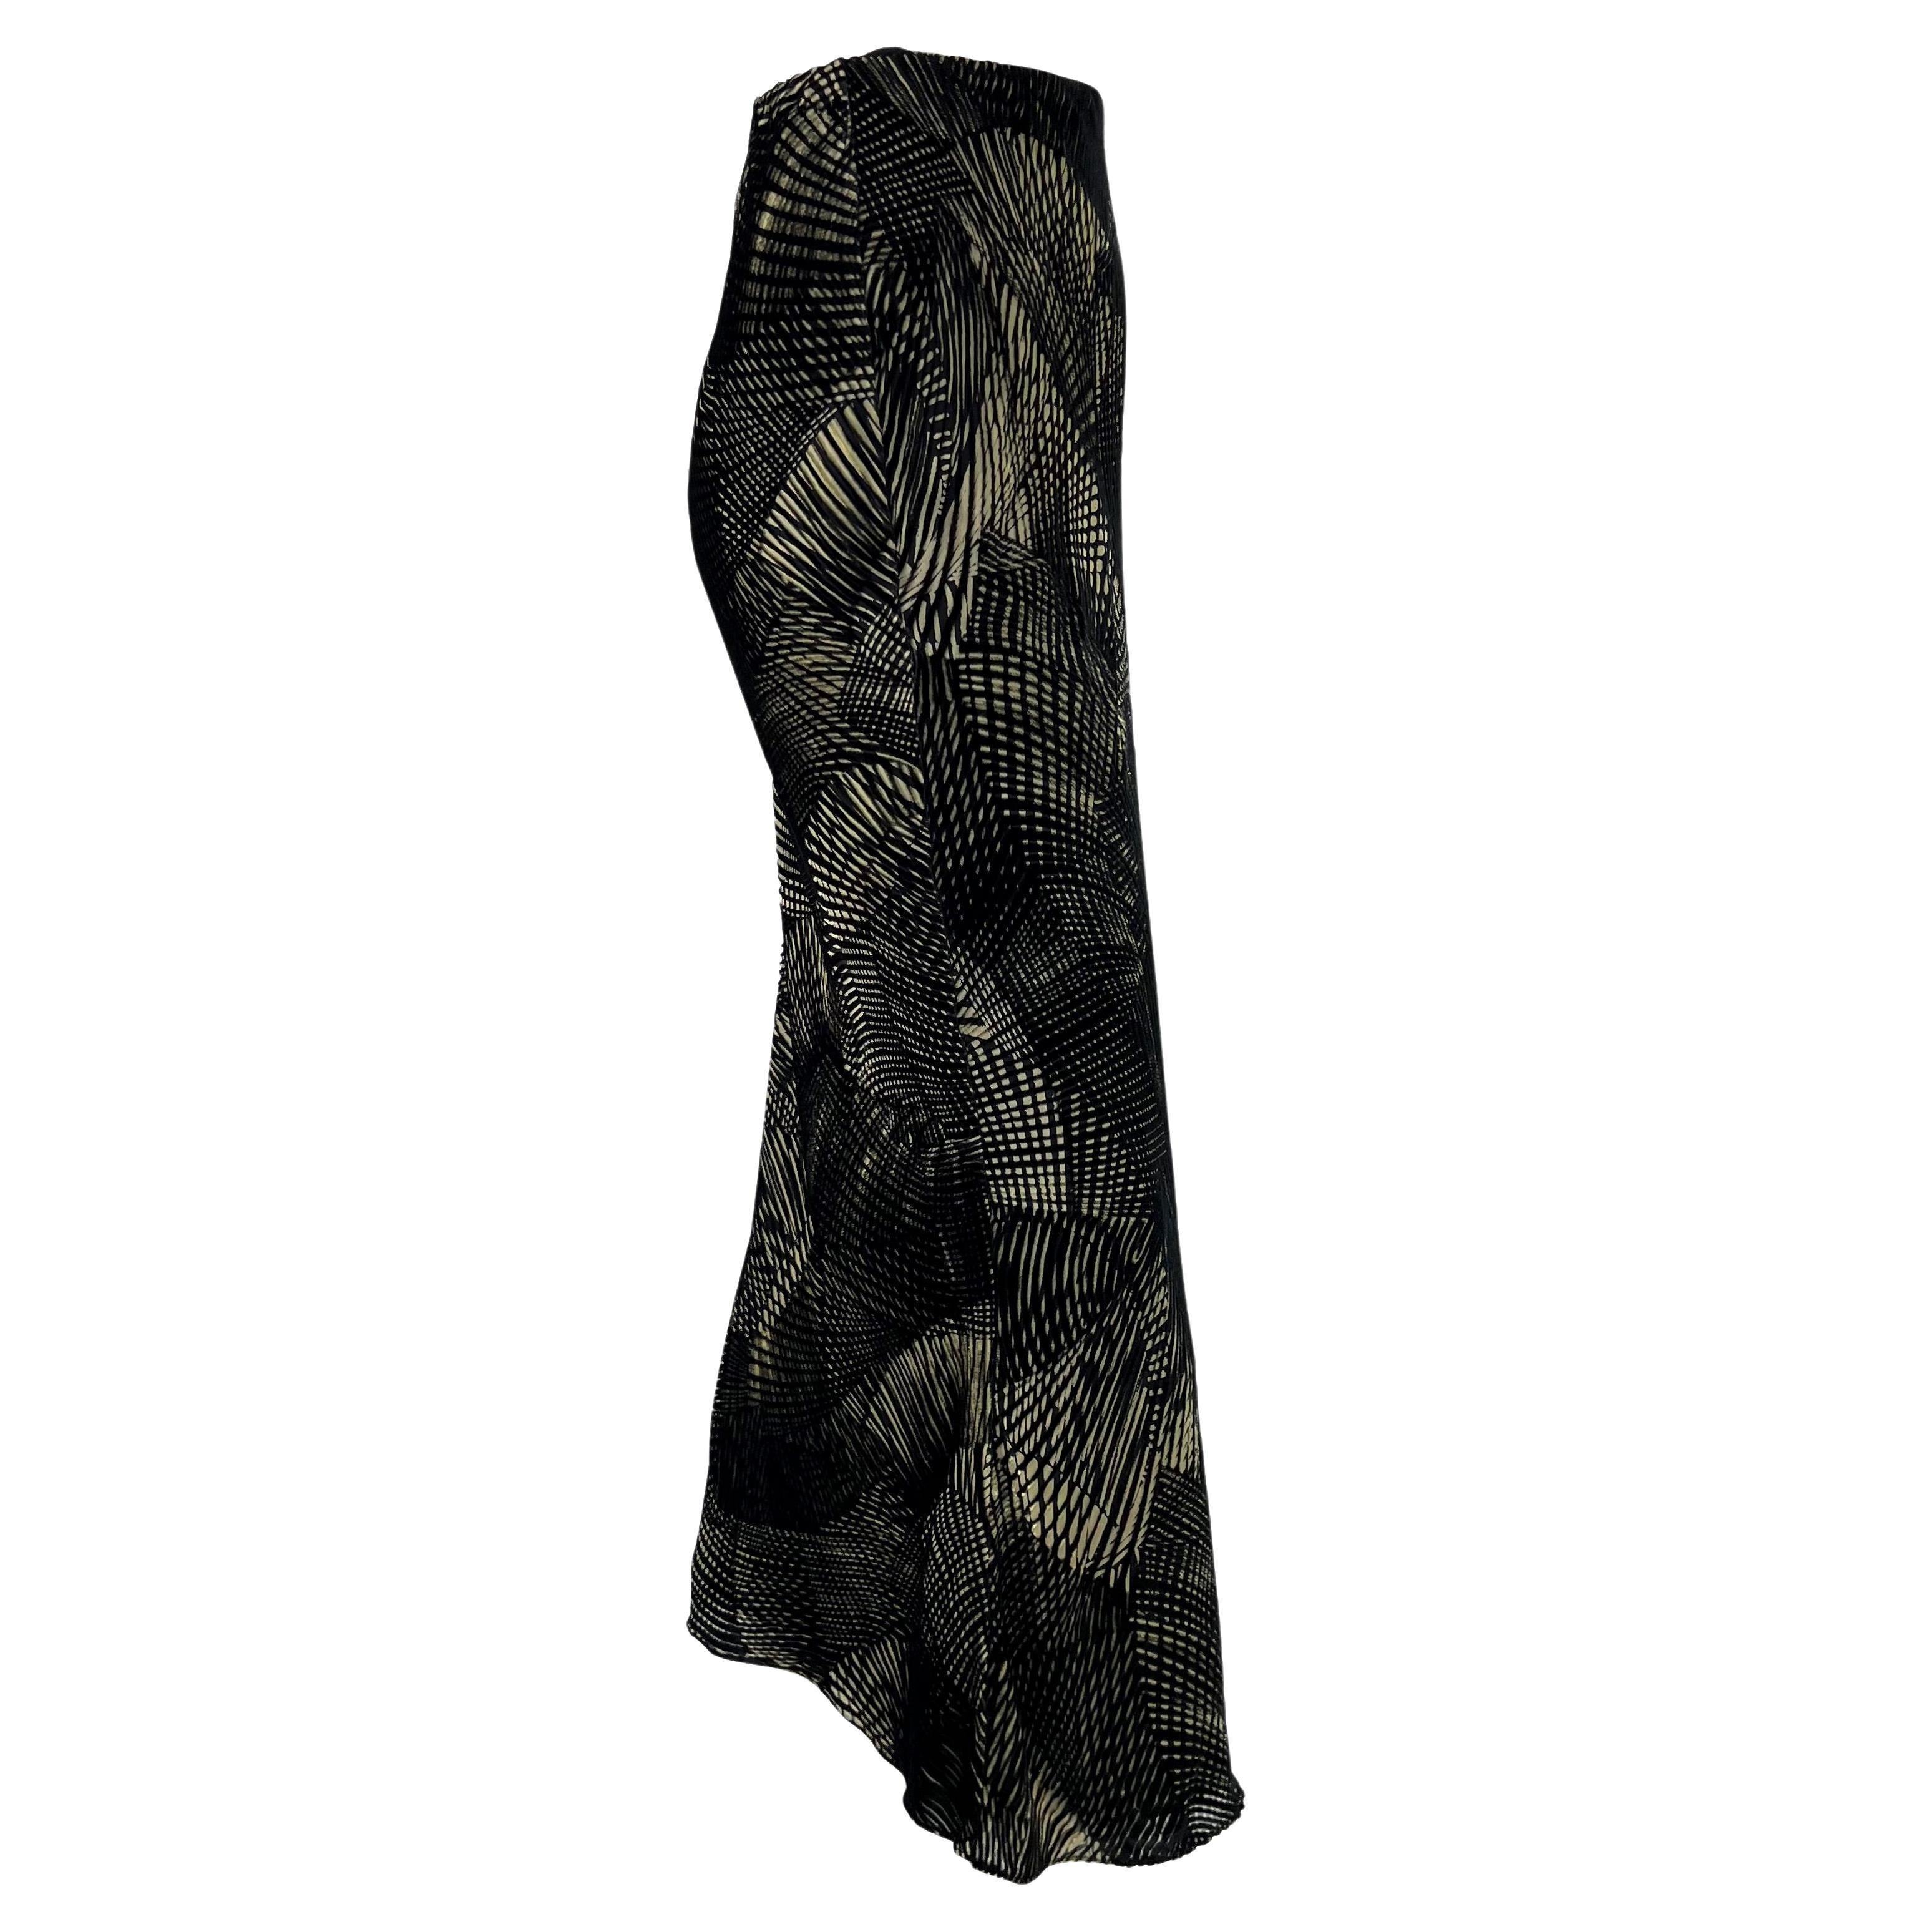 2000s Emanuel Ungaro by Giambattista Valli Sheer Black Velvet Overlay Maxi Skirt In Excellent Condition For Sale In West Hollywood, CA